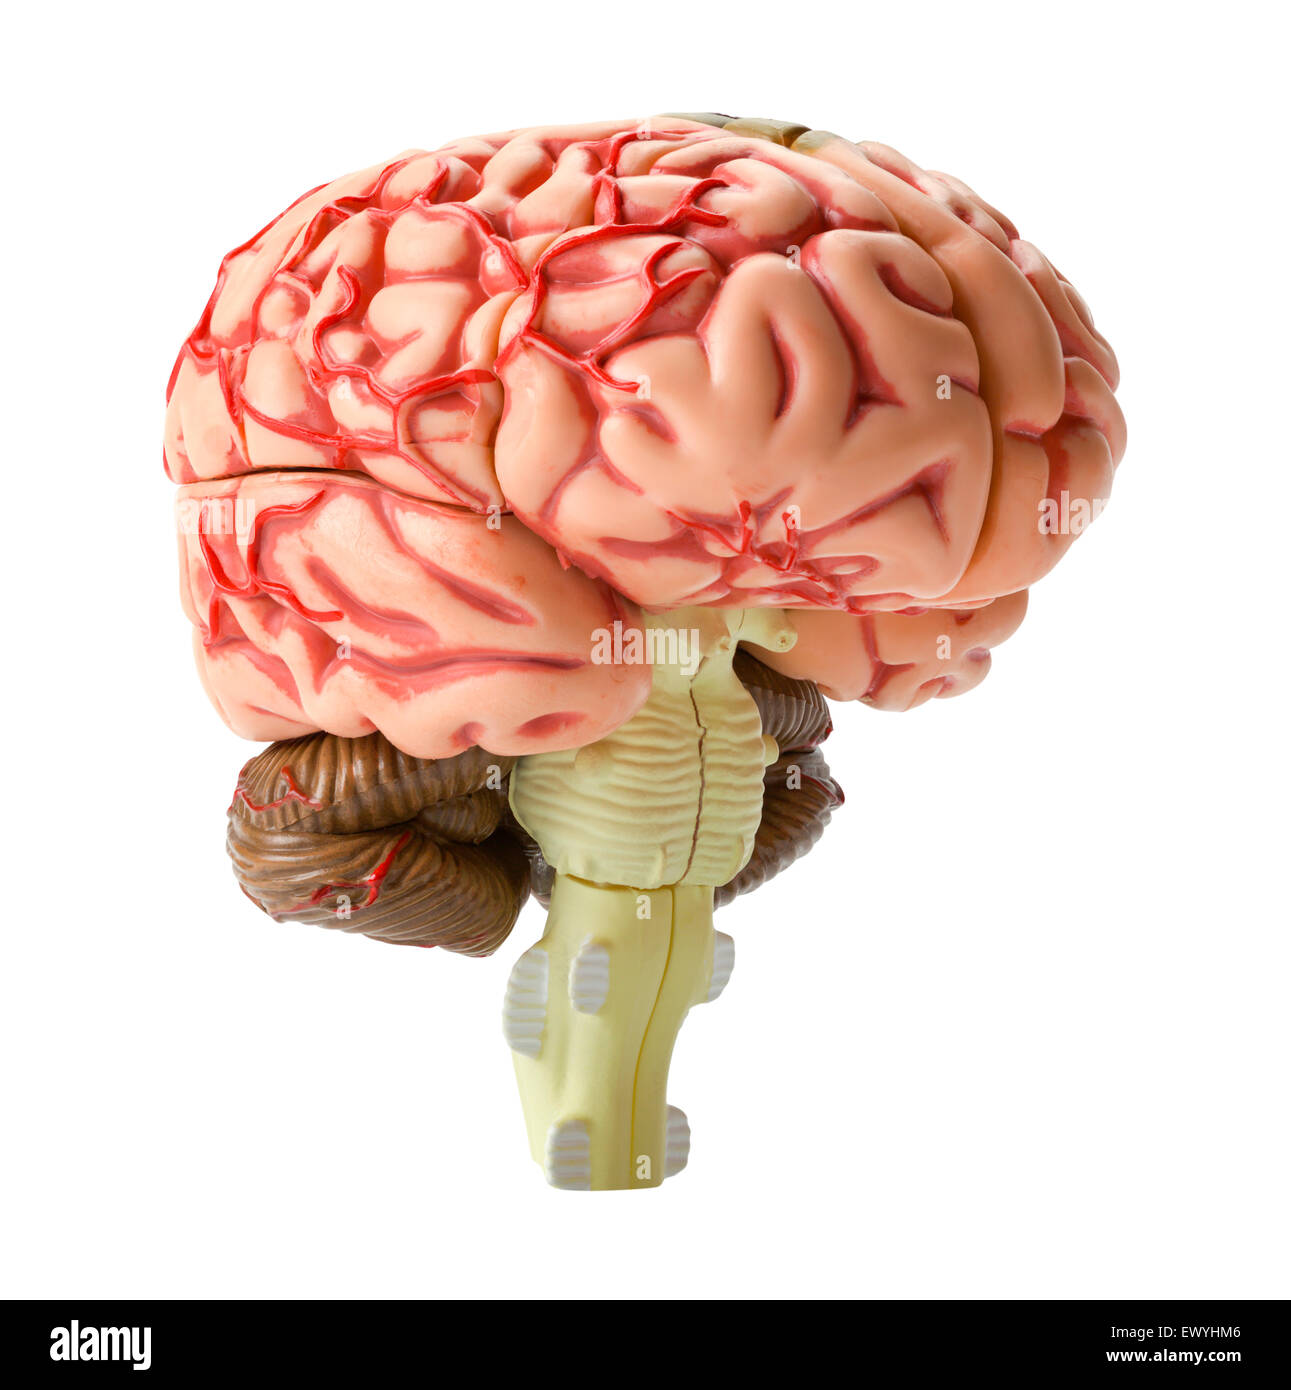 Human Brain Model Side View Isolated on White Background. Stock Photo